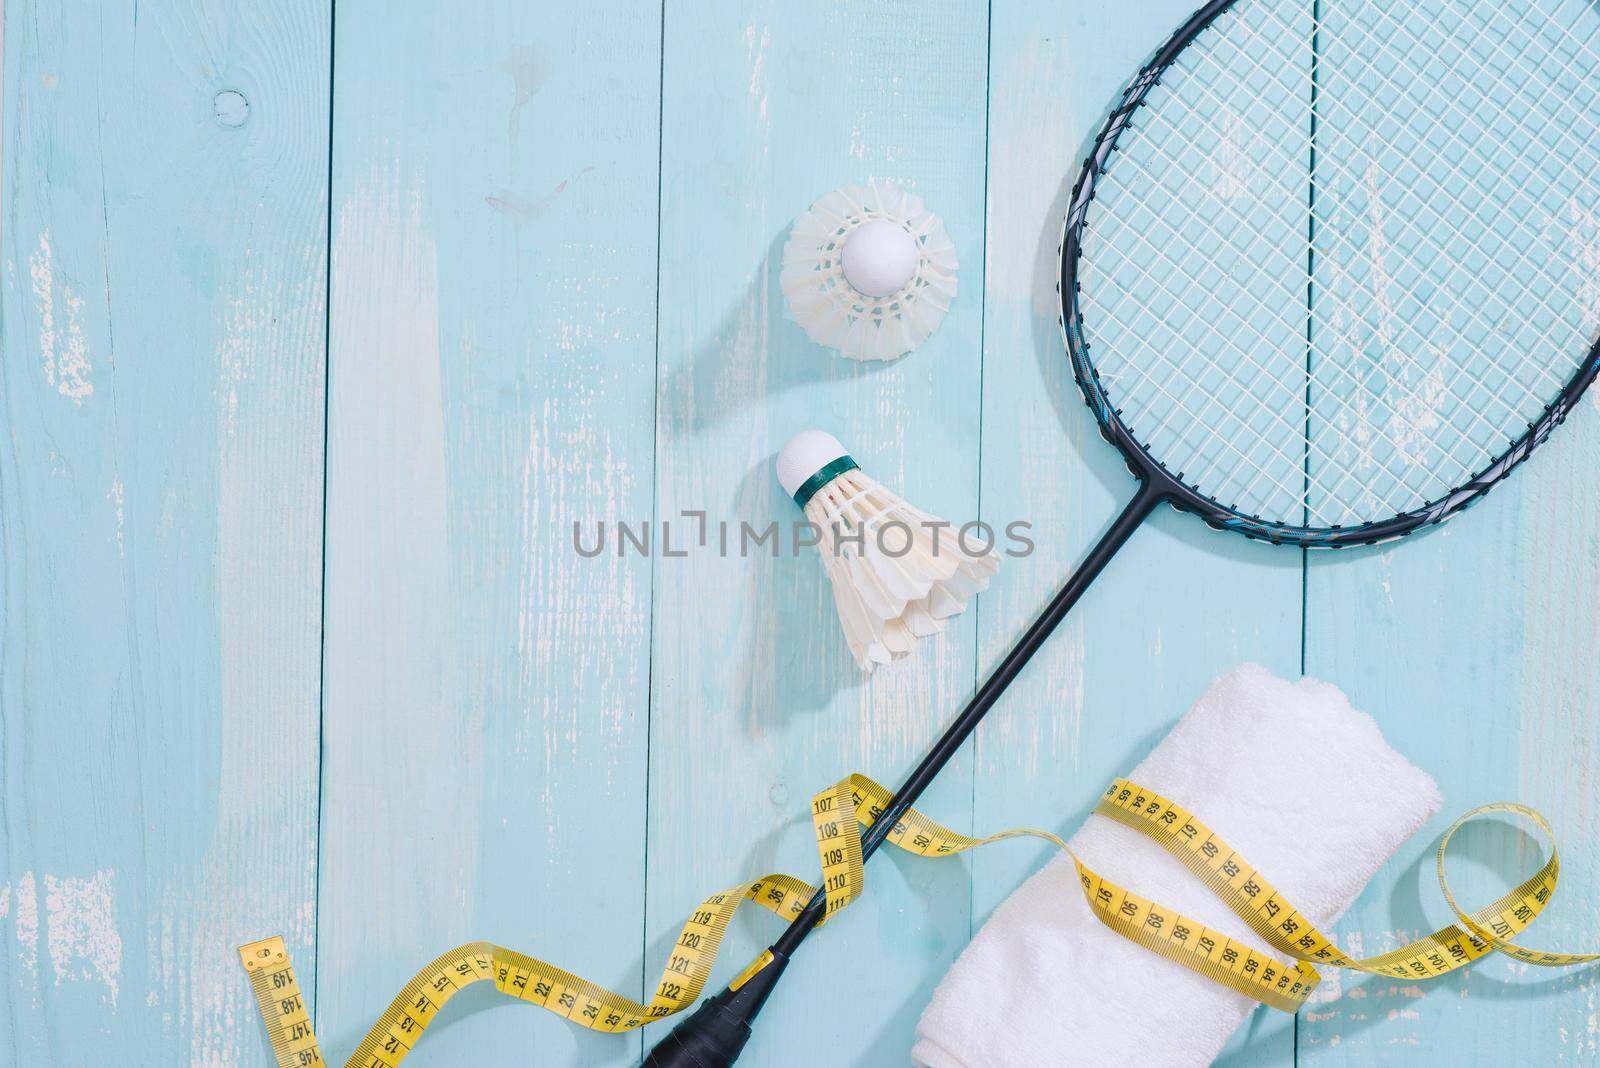 Top view of sport equipments, clock, tape measure, shoes, water bottle, towel, badminton racket and shuttlecock, Healthy lifestyle and fitness concept